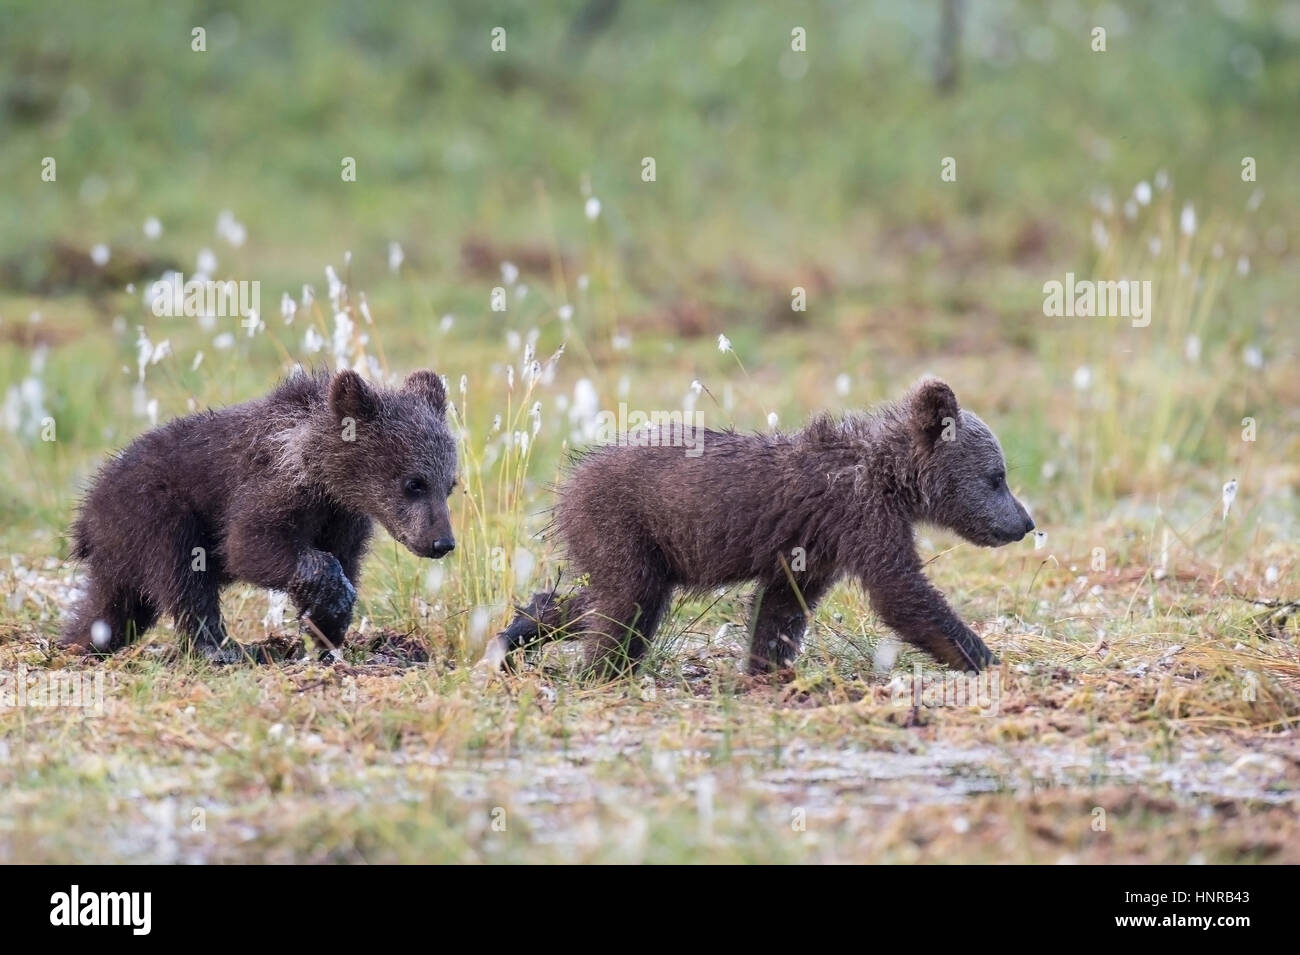 Brown bear with young animals, Braunbaer mit Jungtiere Stock Photo